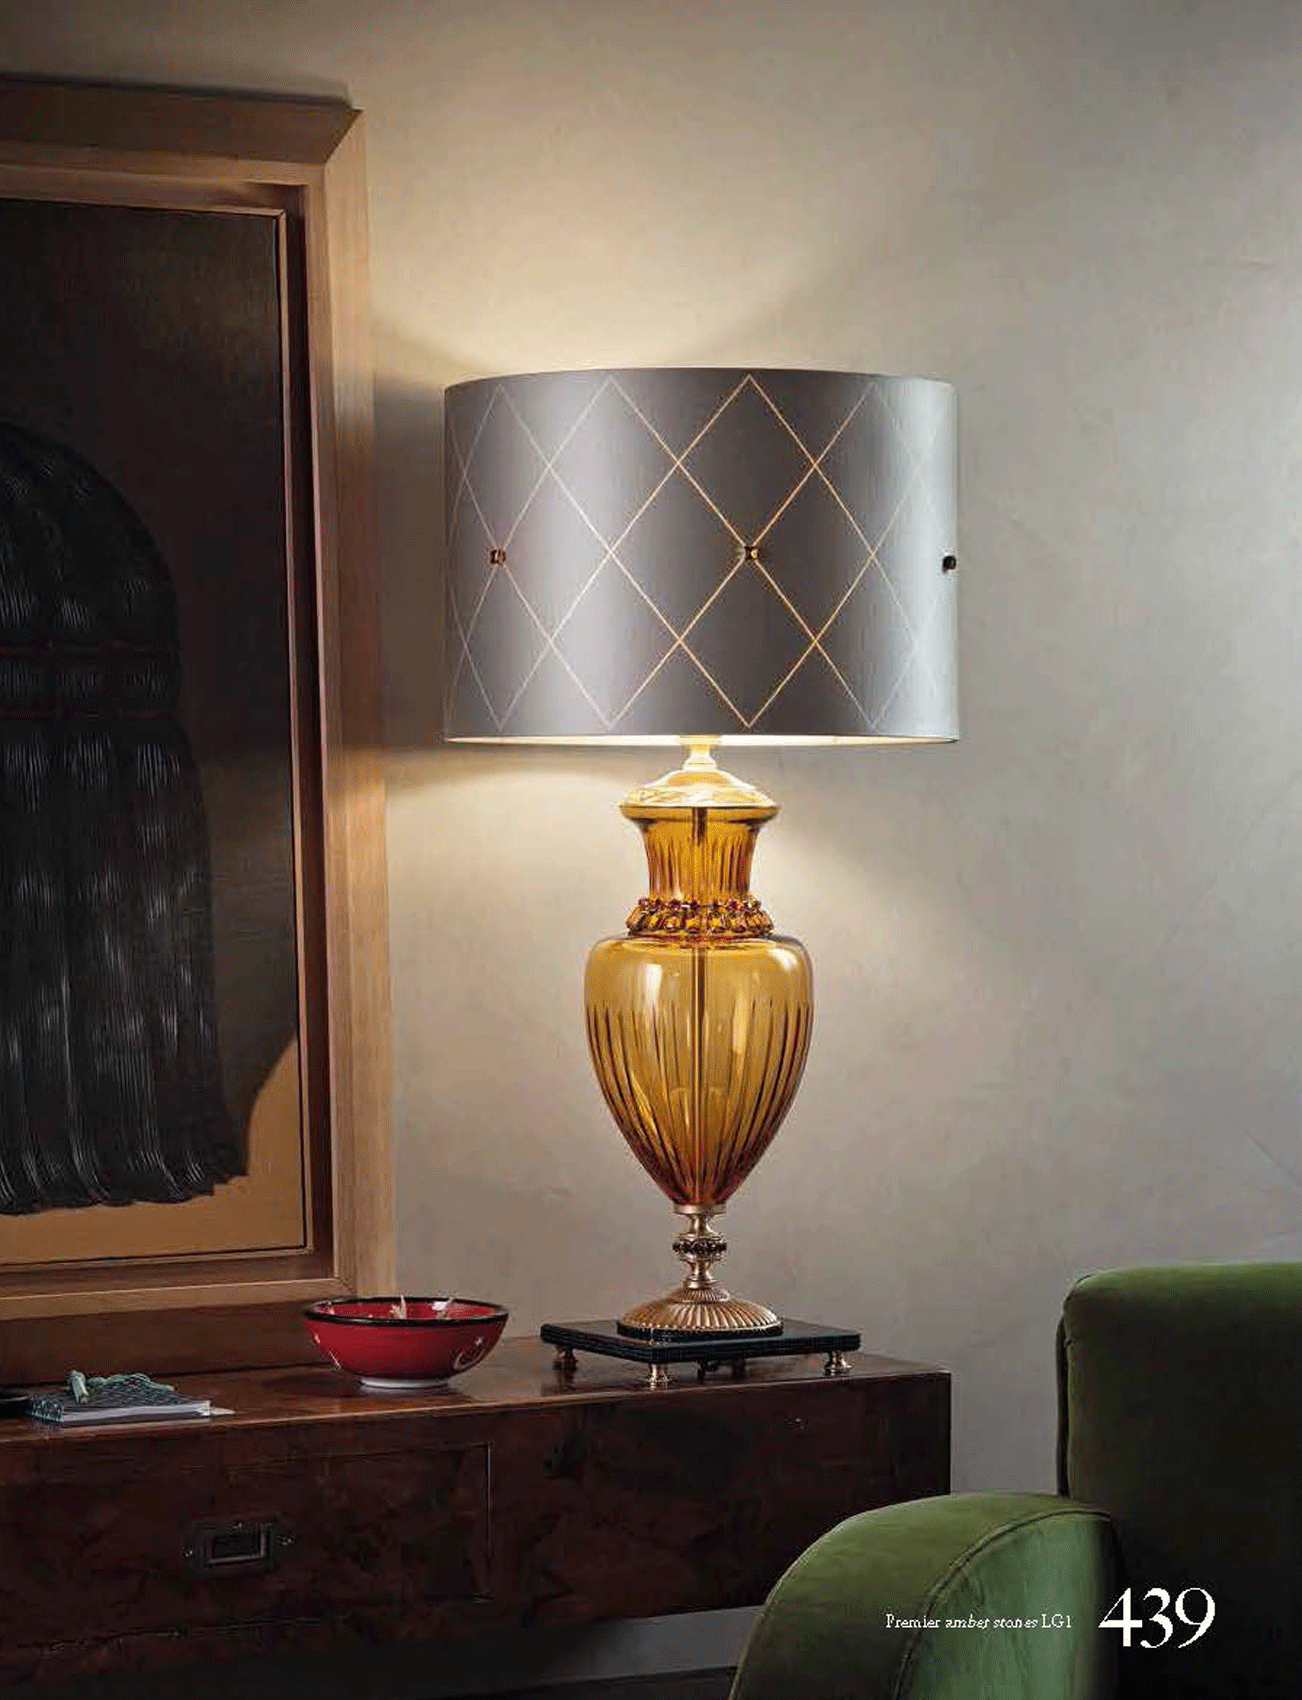 Brands Euroluce Alicante Lighting Collection Italy Premier Table Lamp